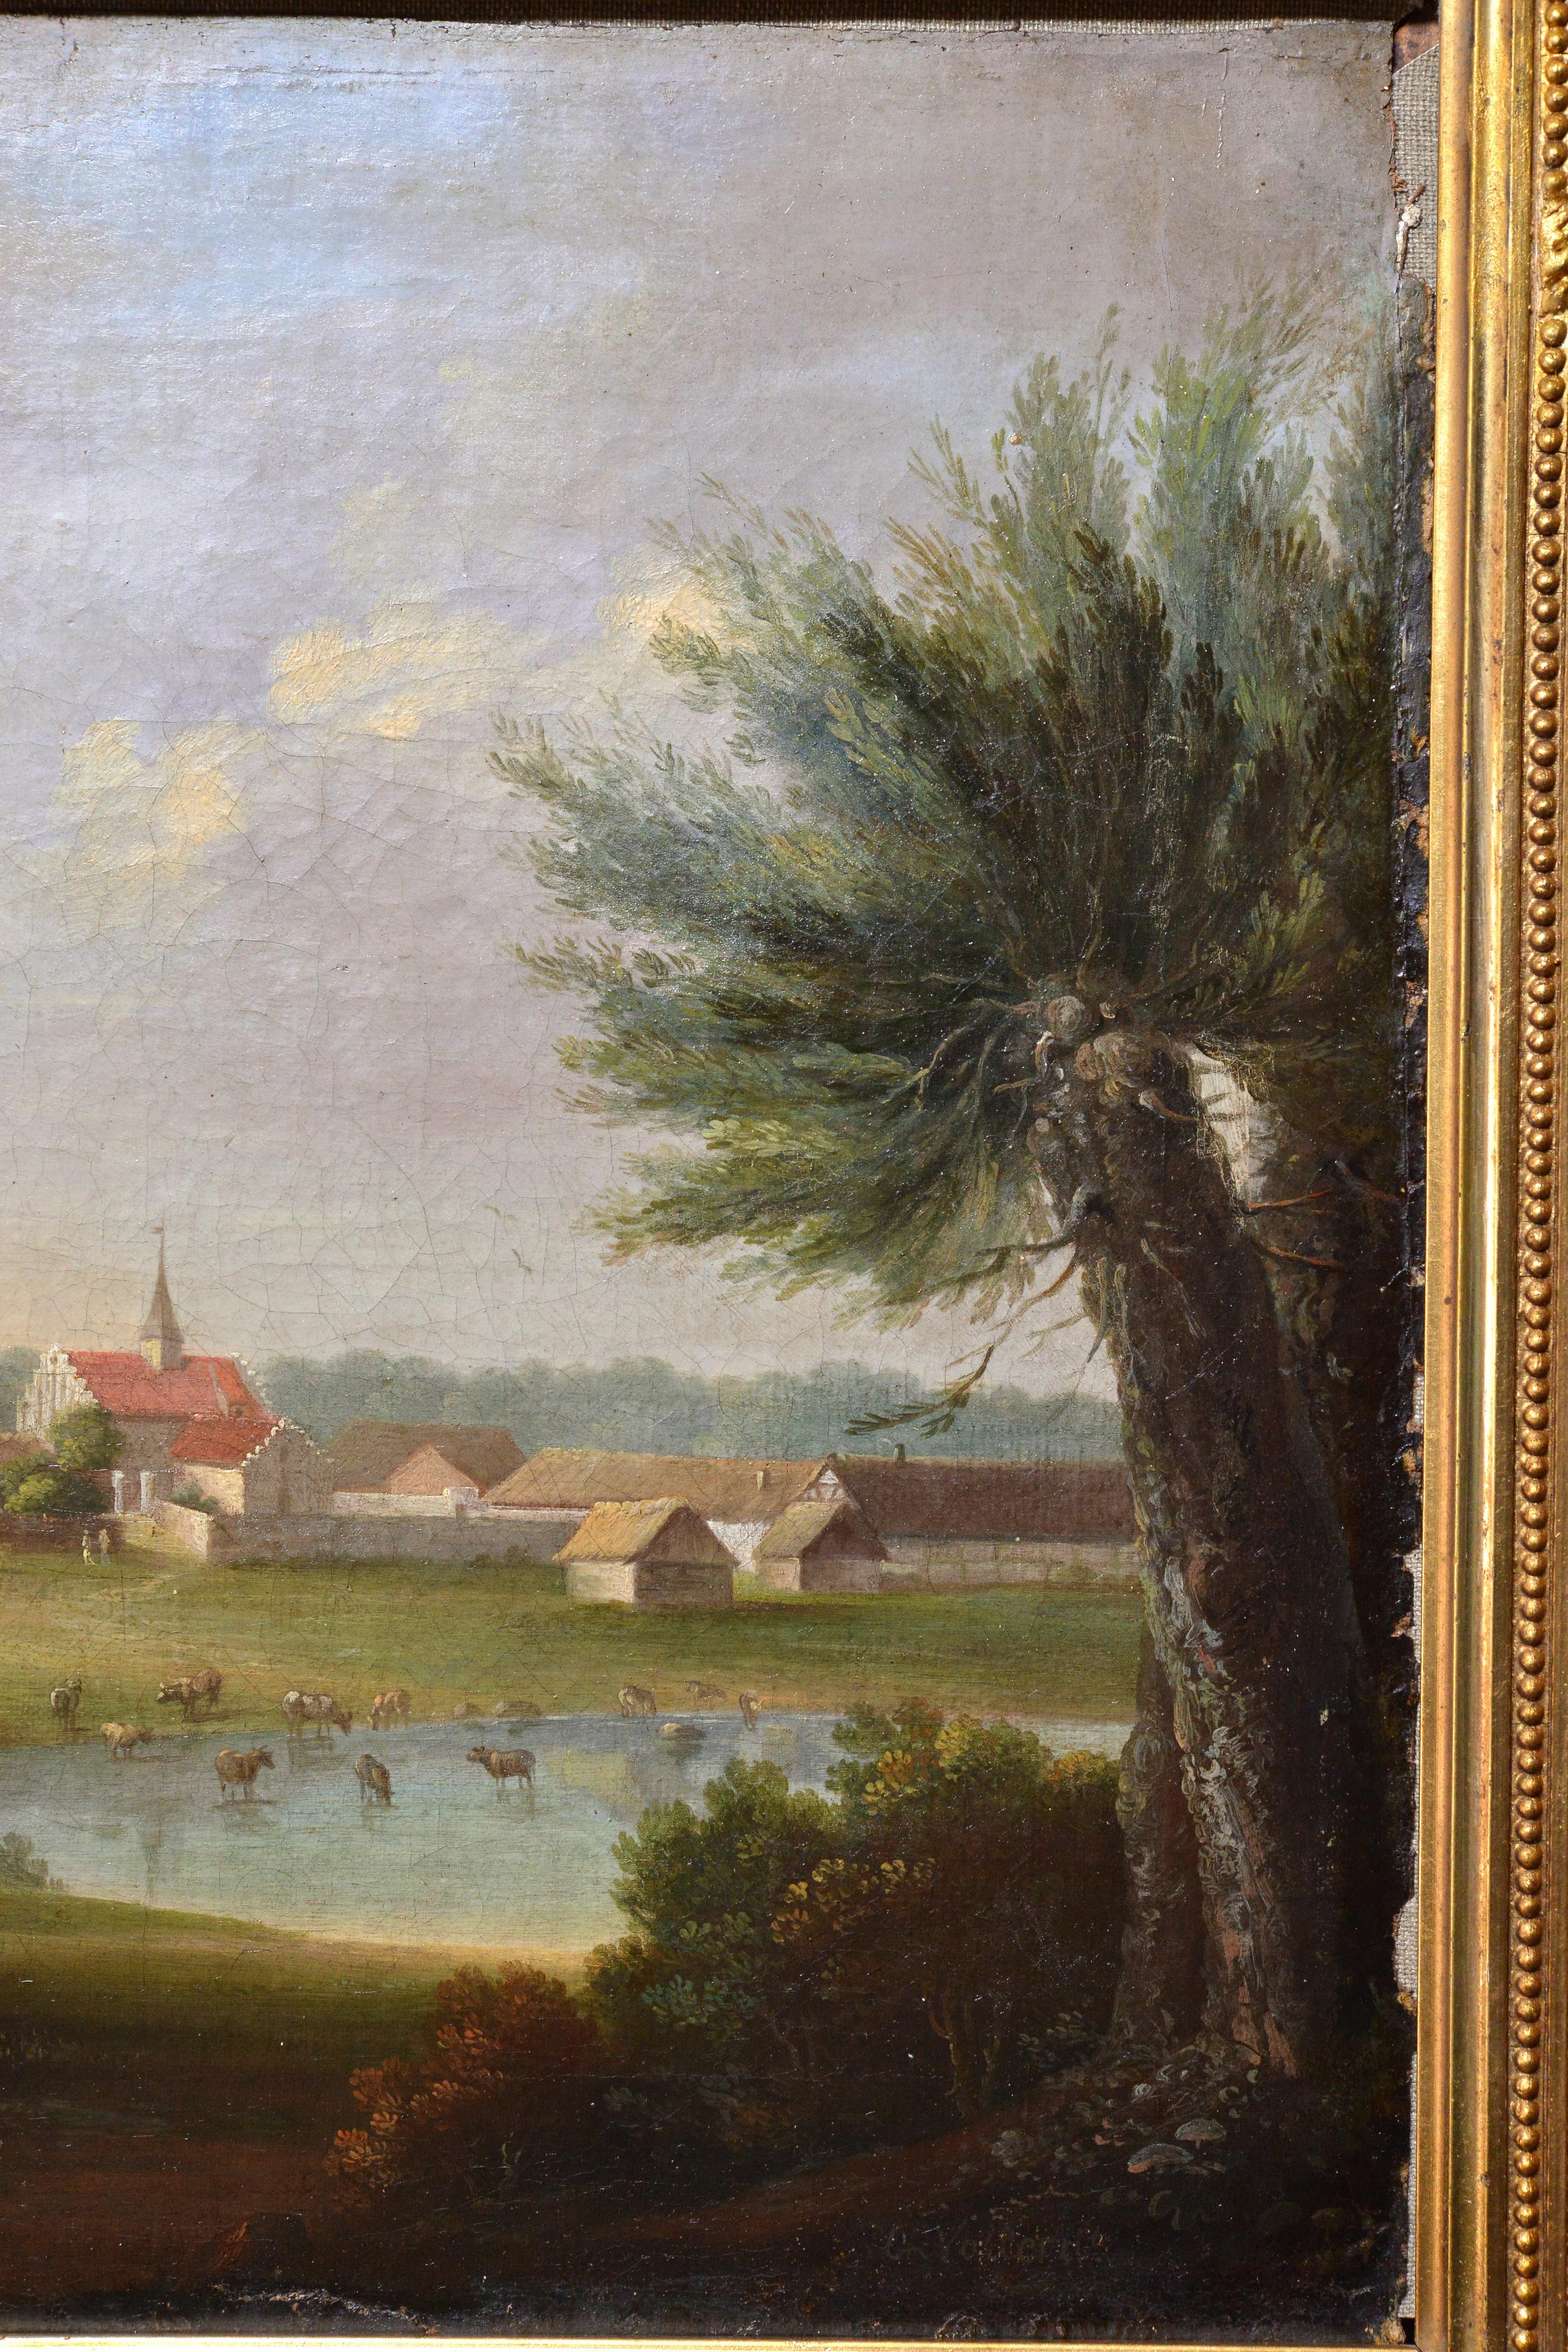 German Baroque landscape Settlement near lake 18th century Oil painting Signed - Brown Landscape Painting by Johann Christian Vollerdt